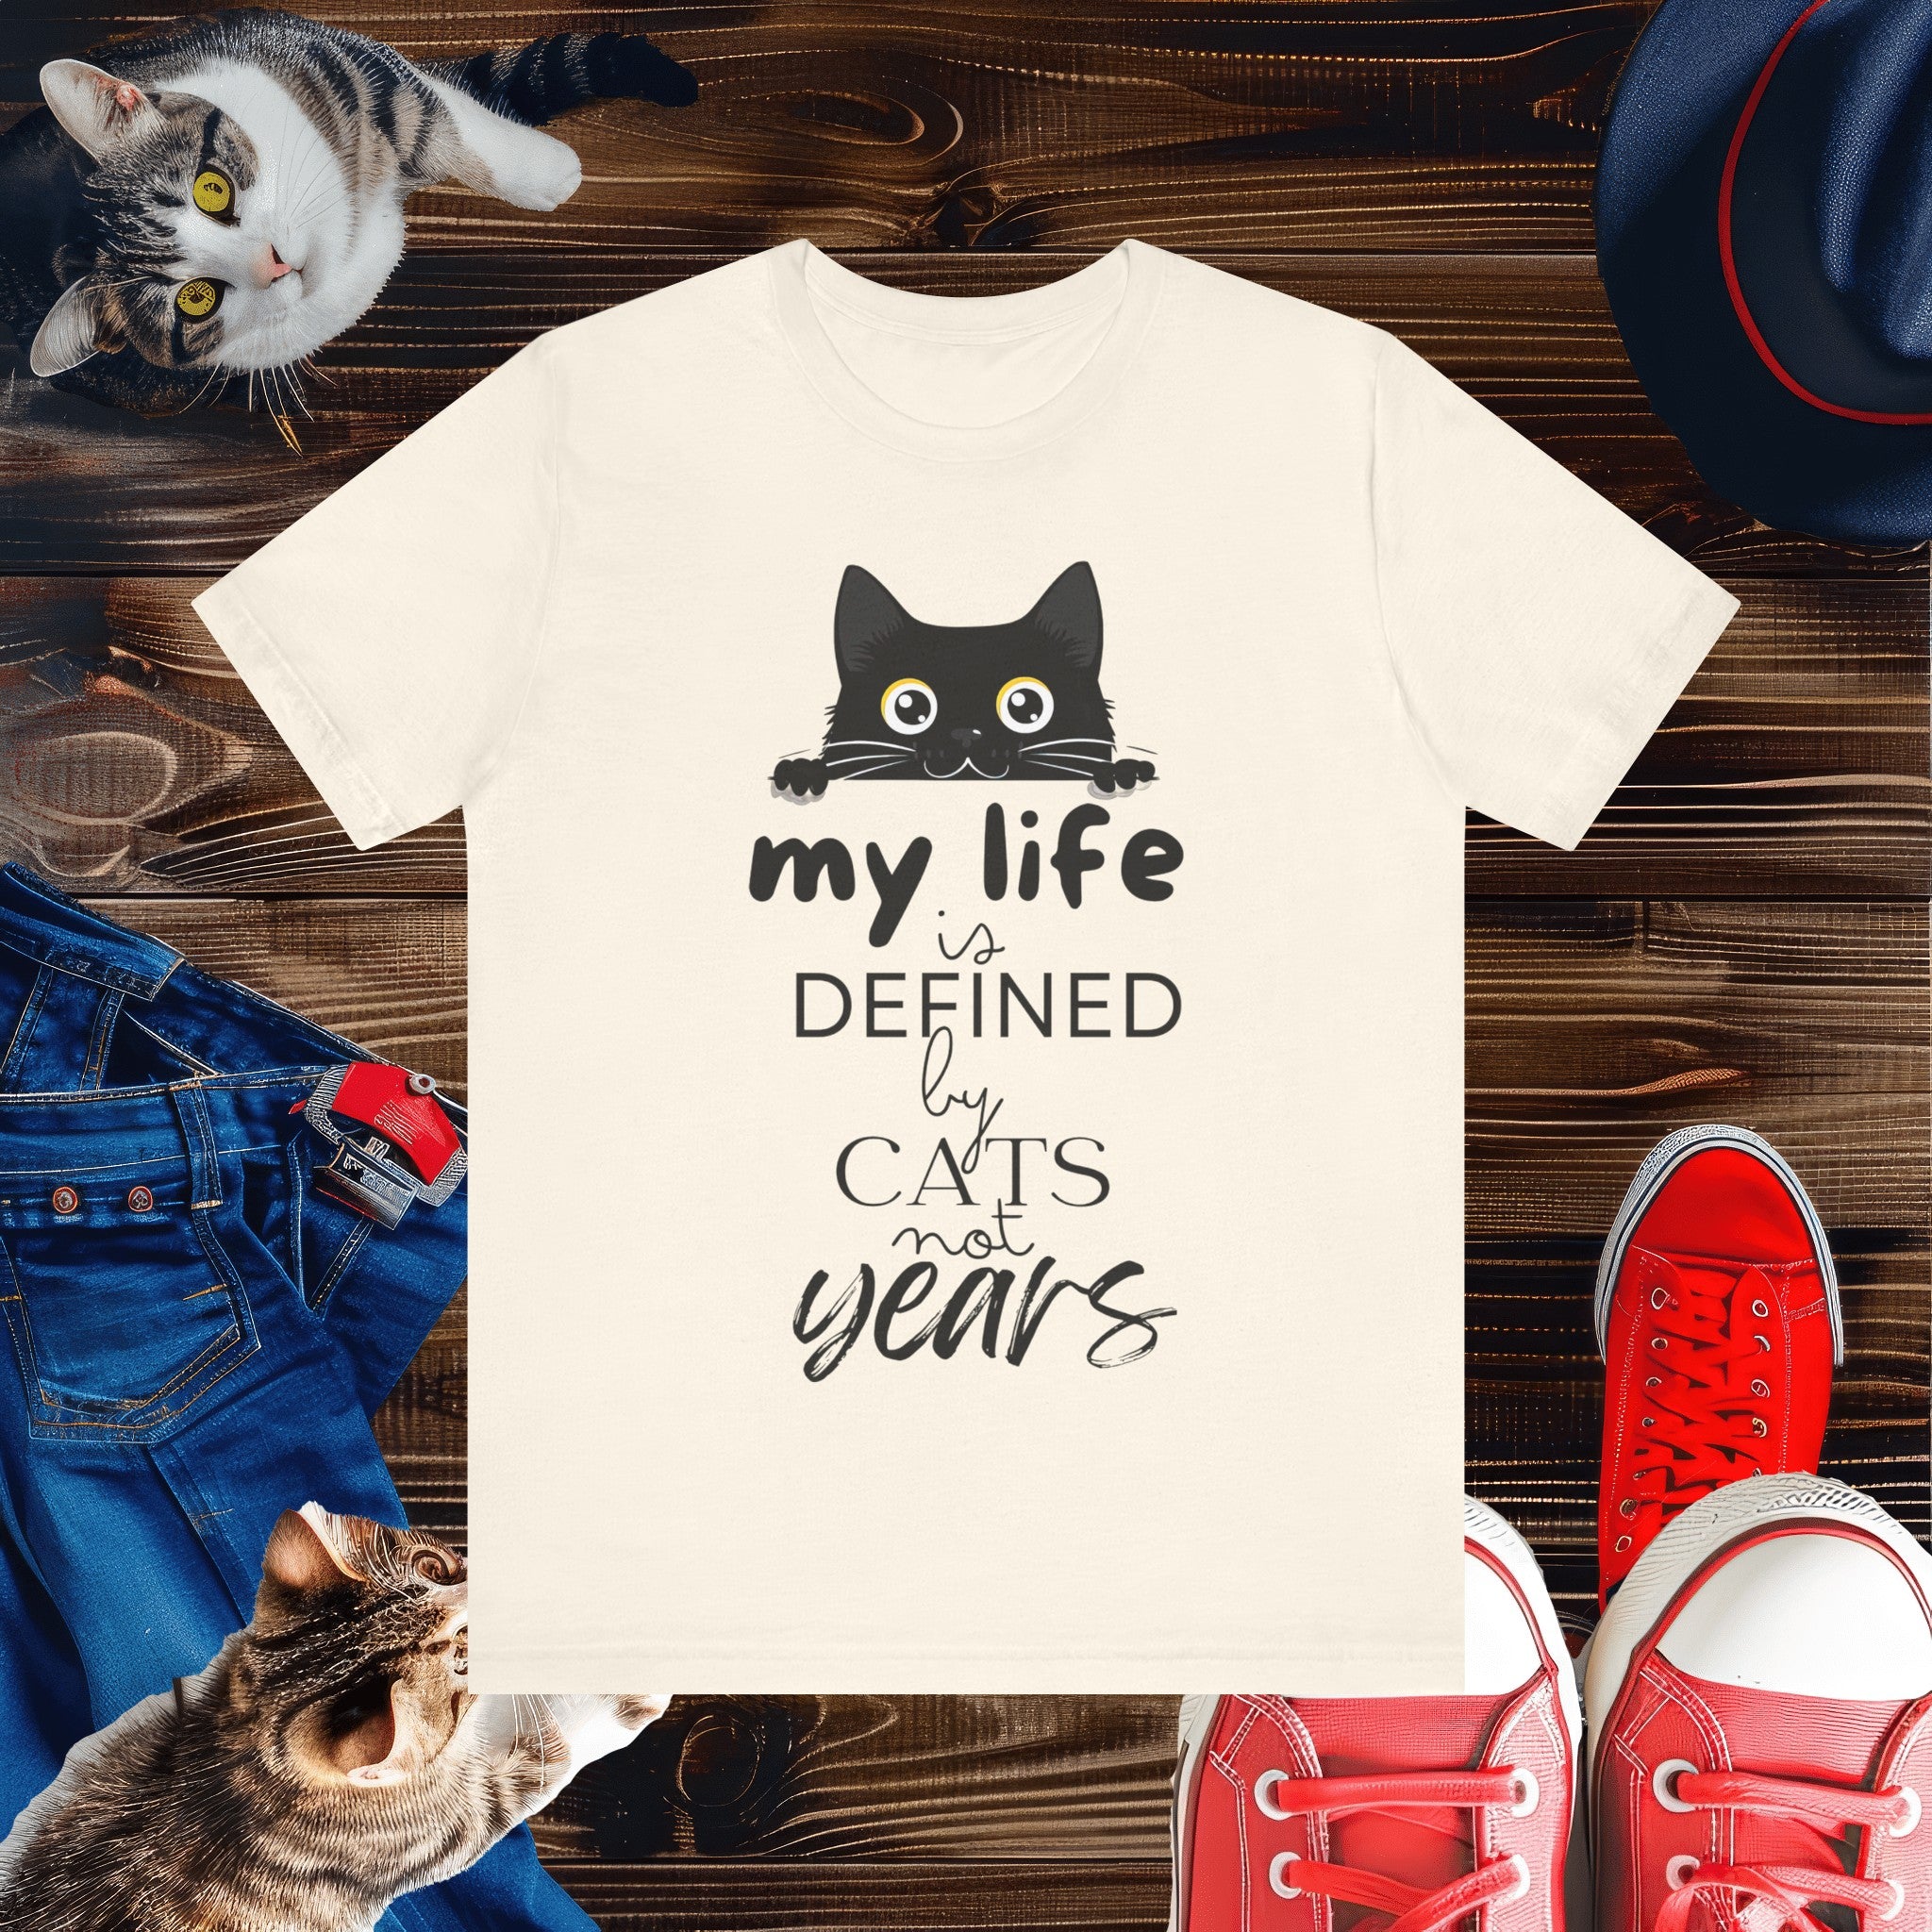 Black Cat T-Shirt - 'My Life is Defined by Cats Not Years' - Unique Cat Lover Tee - Gift for Cat Owners